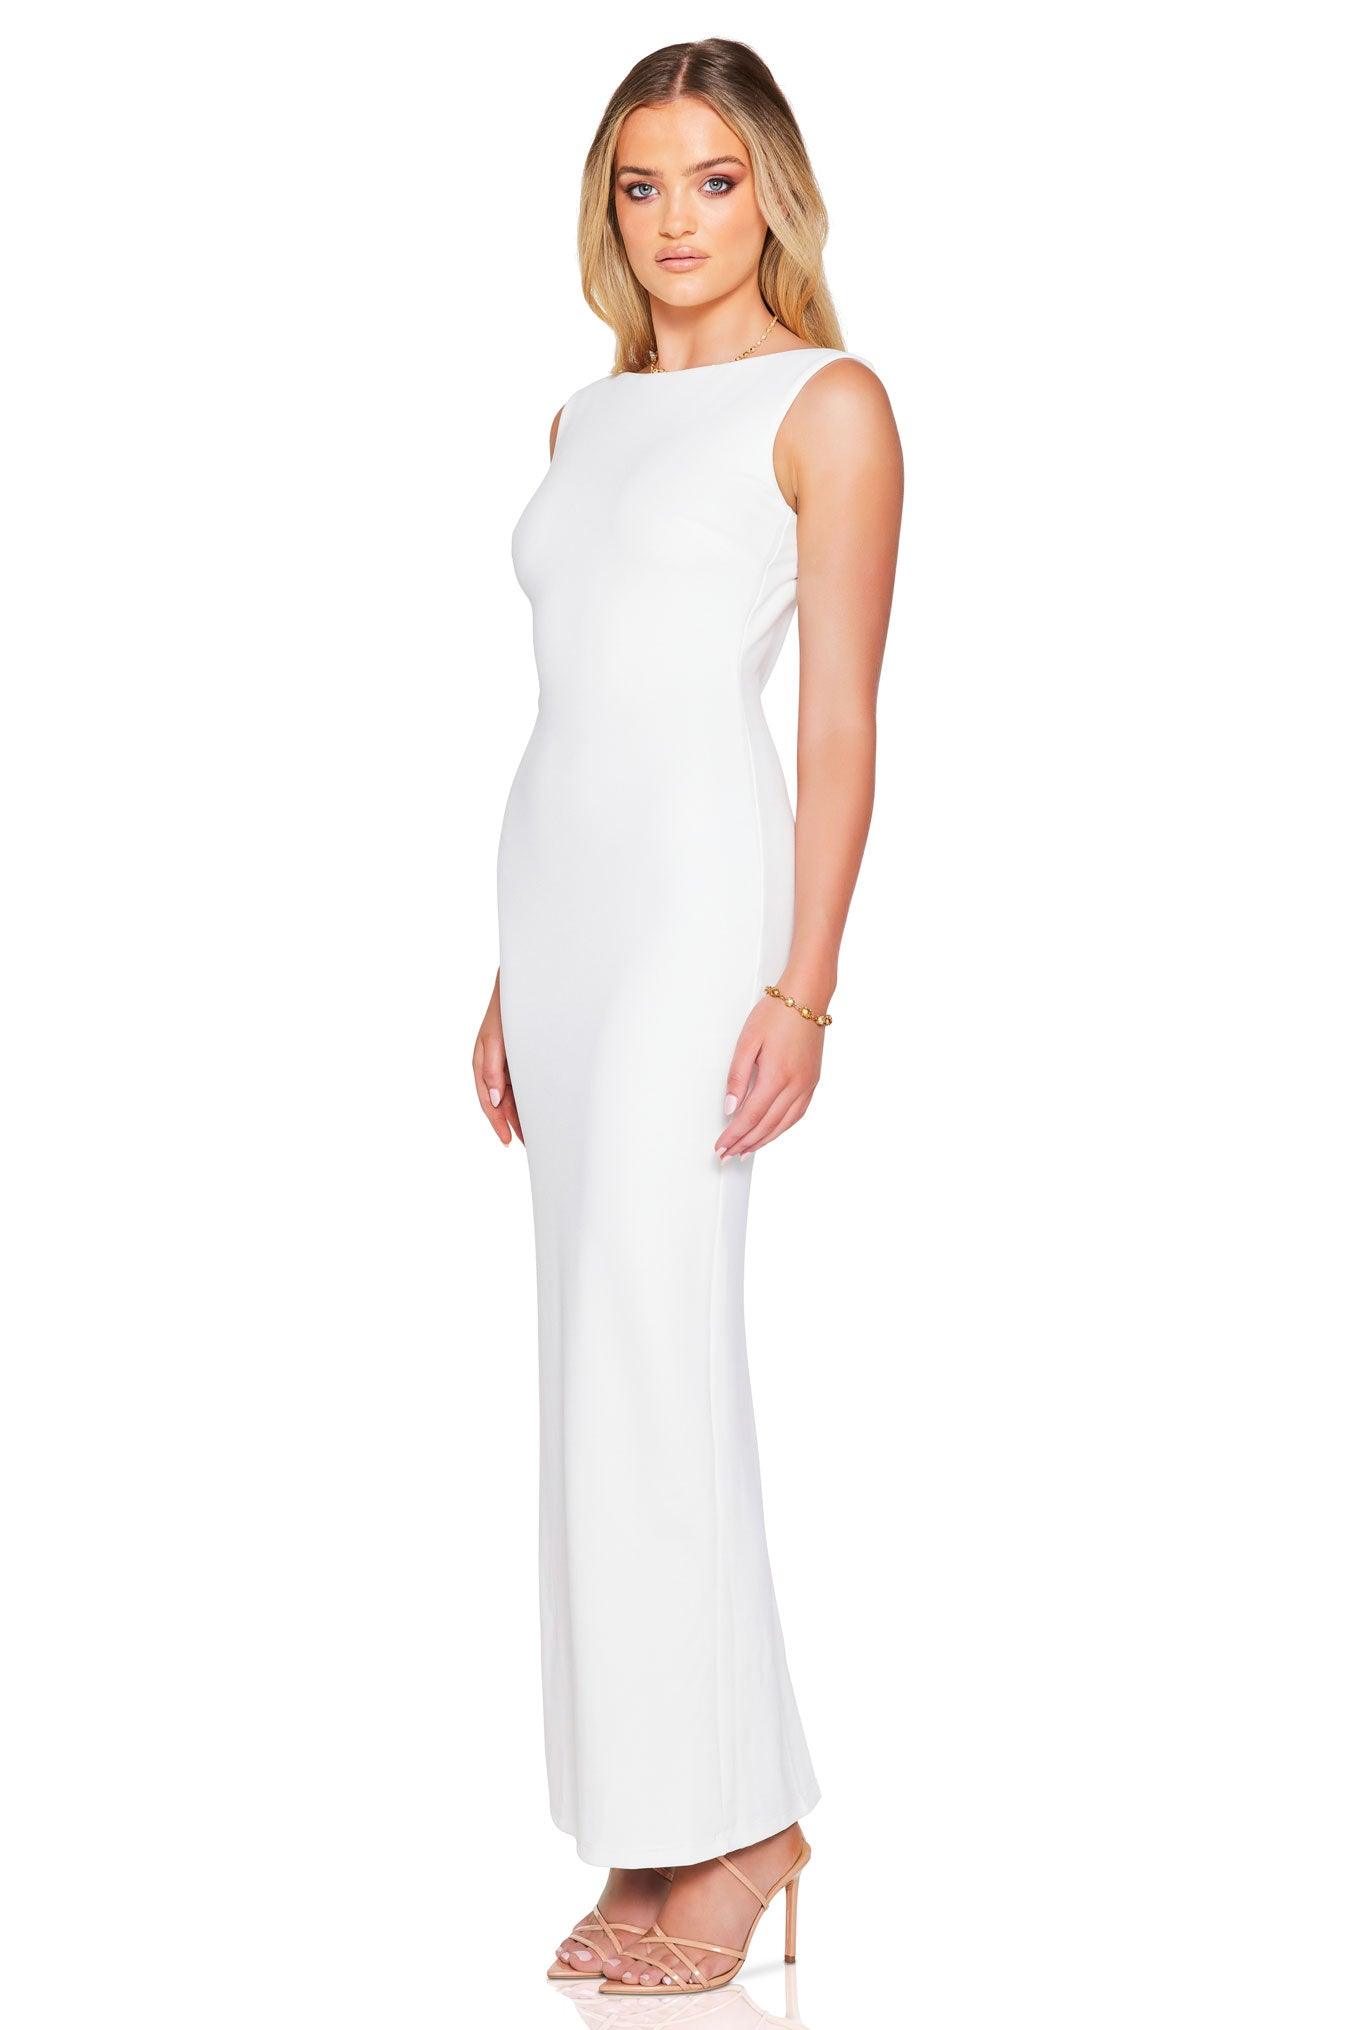 Nookie Bliss Gown - Ivory - JAUS